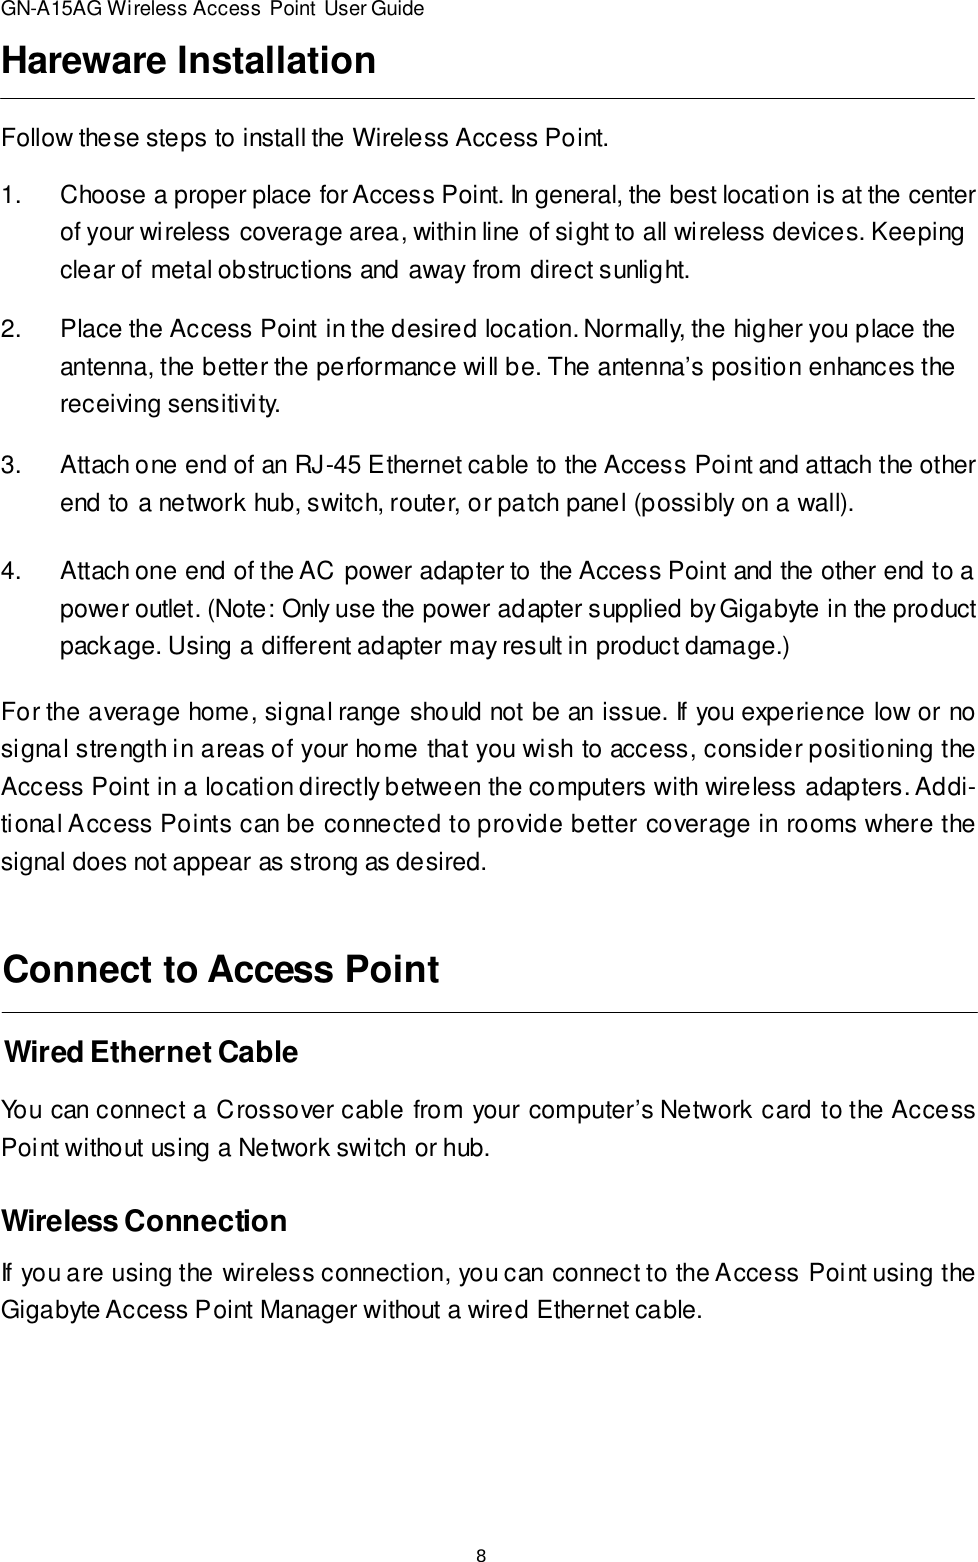 8GN-A15AG Wireless Access Point User GuideFollow these steps to install the Wireless Access Point.Hareware Installation1.Choose a proper place for Access Point. In general, the best location is at the centerof your wireless coverage area, within line of sight to all wireless devices. Keepingclear of metal obstructions and away from direct sunlight.2.Place the Access Point in the desired location. Normally, the higher you place theantenna, the better the performance will be. The antenna’s position enhances thereceiving sensitivity.3.Attach one end of an RJ-45 Ethernet cable to the Access Point and attach the otherend to a network hub, switch, router, or patch panel (possibly on a wall).4.Attach one end of the AC power adapter to the Access Point and the other end to apower outlet. (Note: Only use the power adapter supplied by Gigabyte in the productpackage. Using a different adapter may result in product damage.)For the average home, signal range should not be an issue. If you experience low or nosignal strength in areas of your home that you wish to access, consider positioning theAccess Point in a location directly between the computers with wireless adapters. Addi-tional Access Points can be connected to provide better coverage in rooms where thesignal does not appear as strong as desired.Wired Ethernet CableConnect to Access PointYou can connect a Crossover cable from your computer’s Network card to the AccessPoint without using a Network switch or hub.Wireless ConnectionIf you are using the wireless connection, you can connect to the Access Point using theGigabyte Access Point Manager without a wired Ethernet cable.